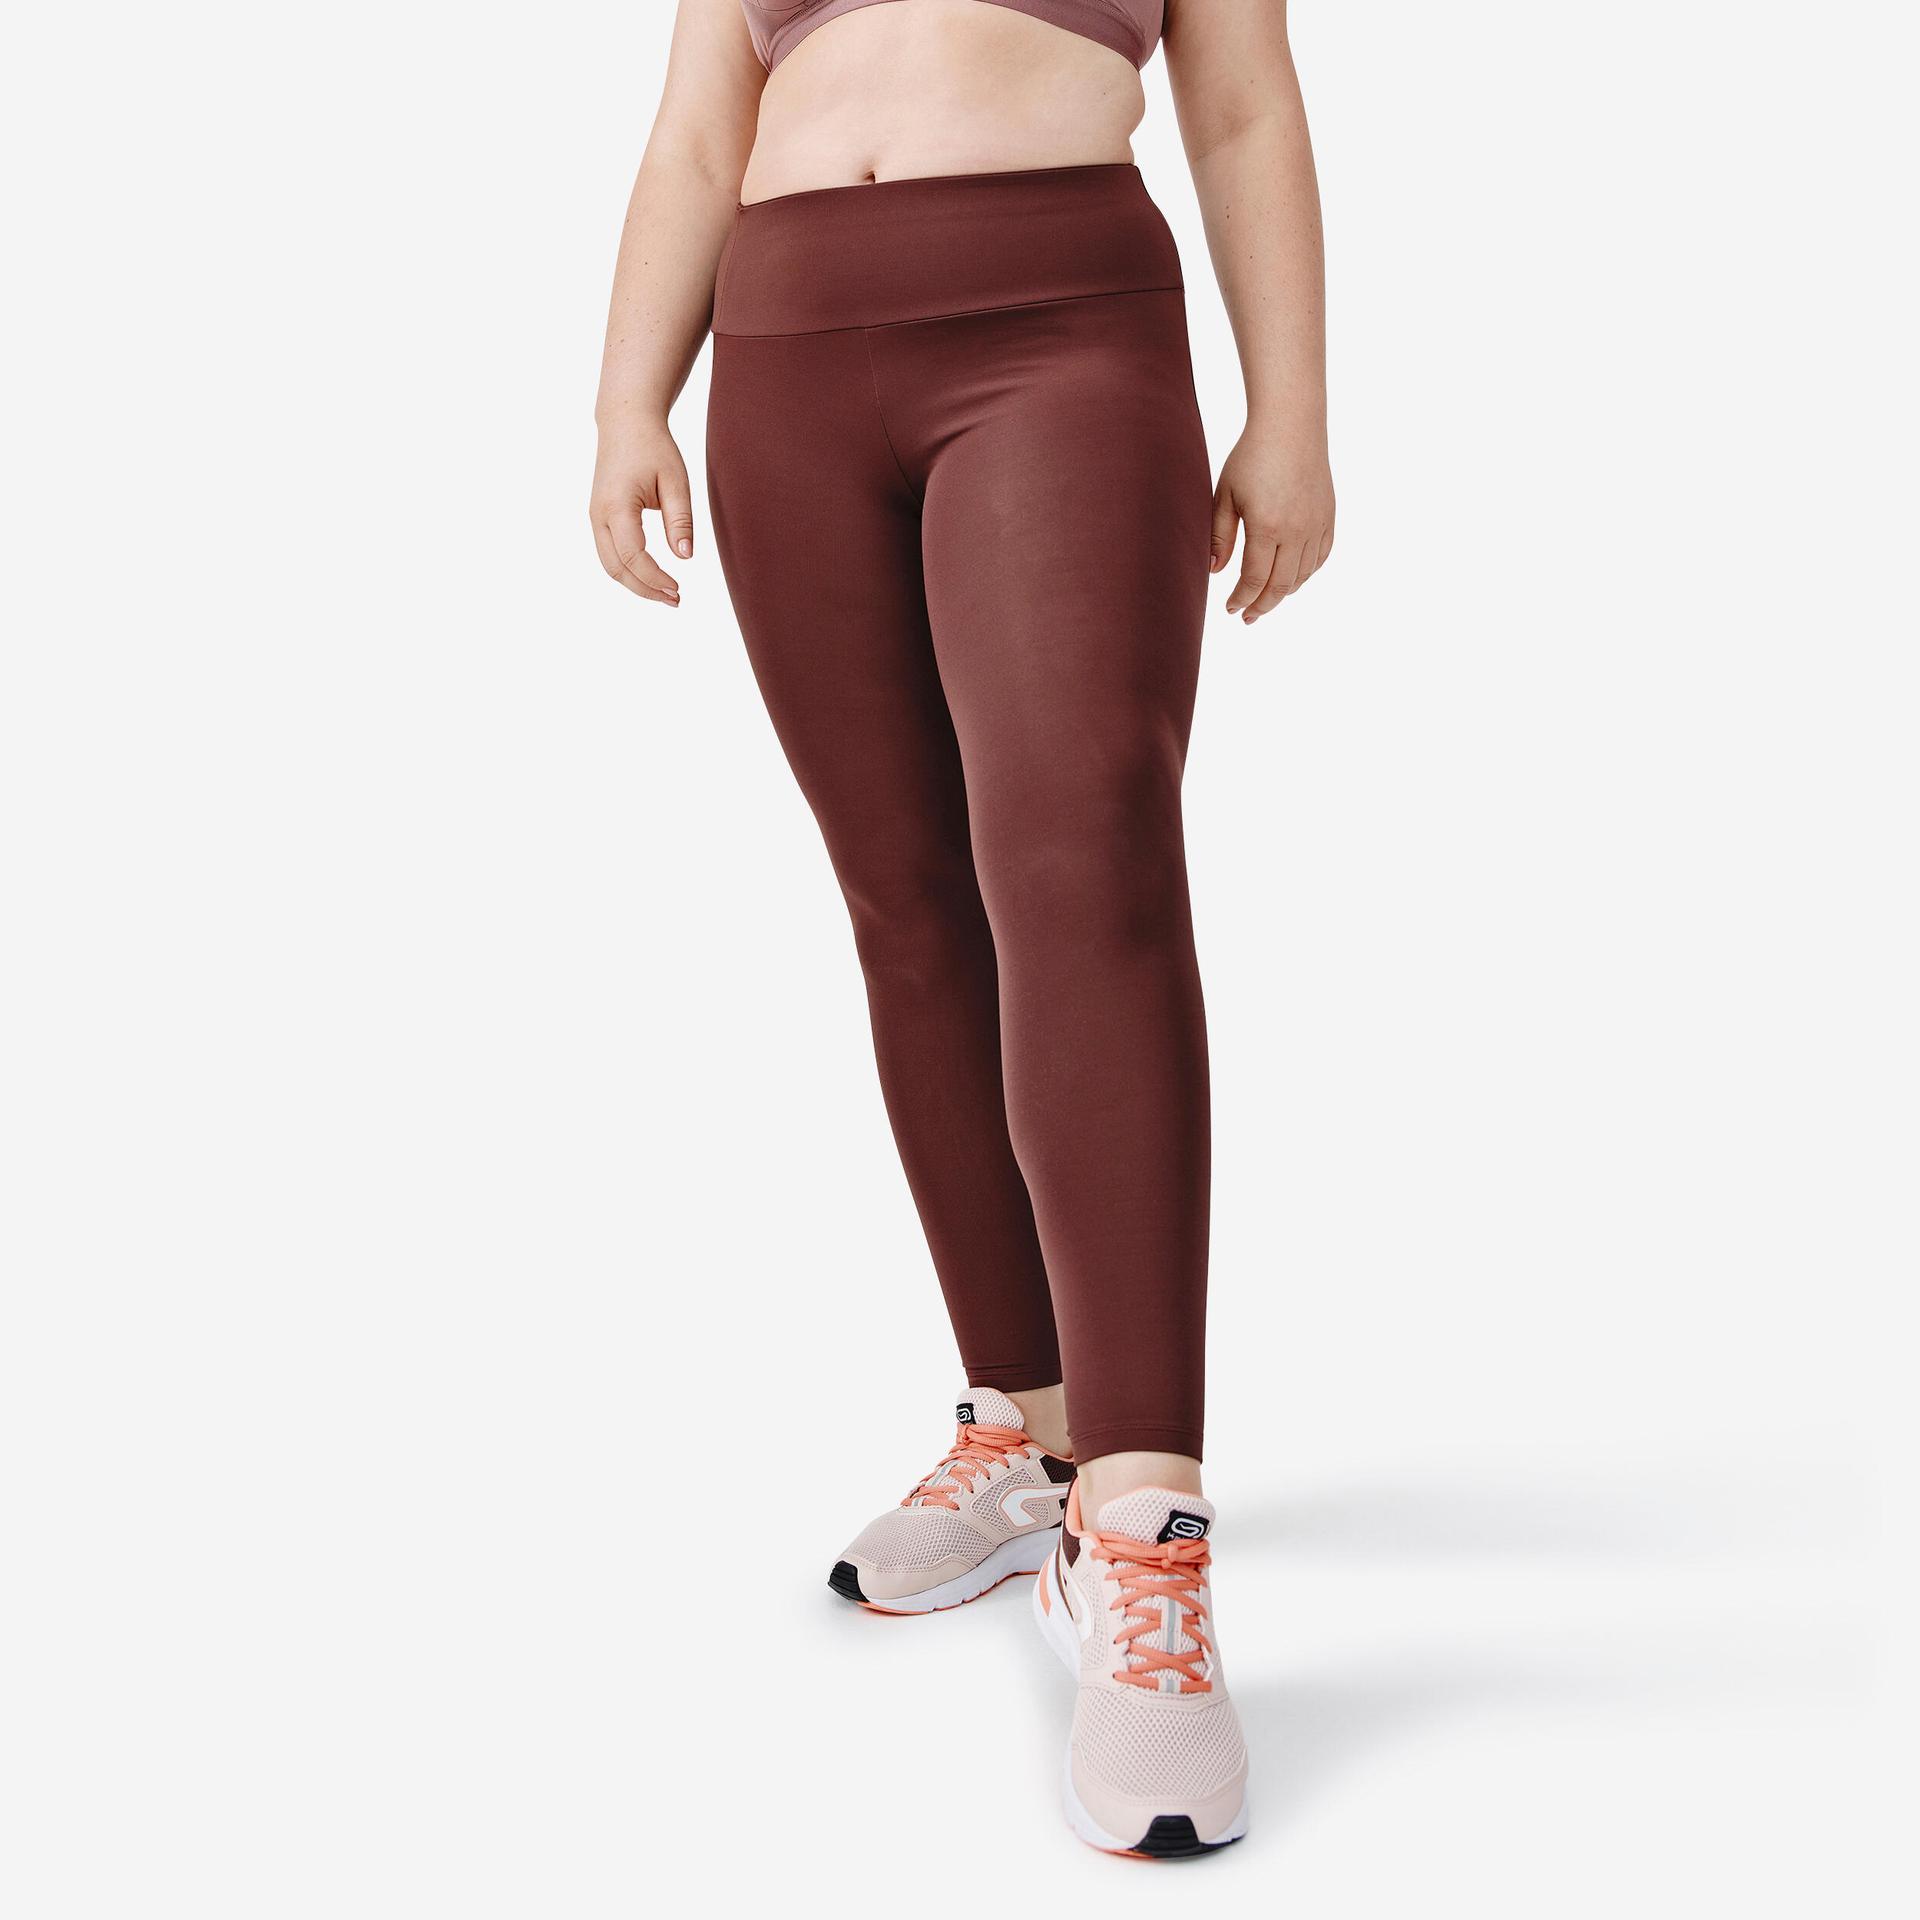 women's-running-leggings-with-body-sculpting-(xs-to-5xl---large-size)---brown